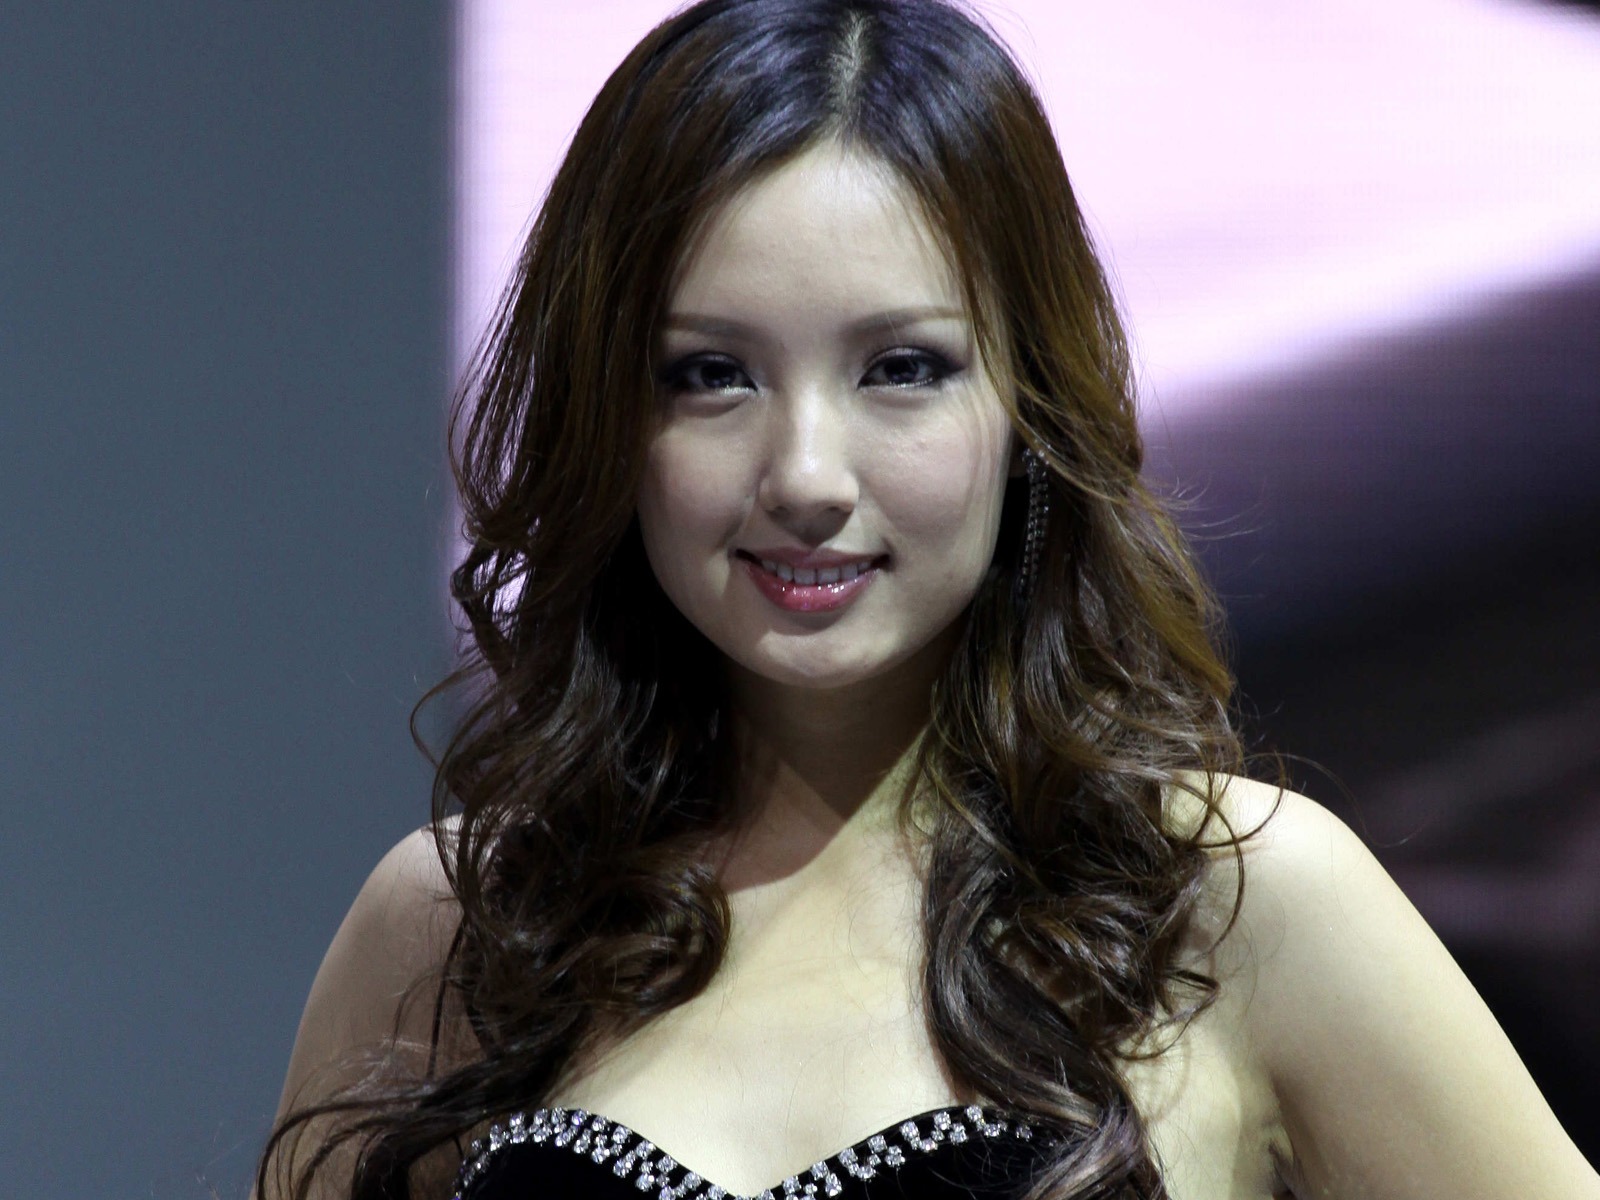 2010 Beijing Auto Show car models Collection (2) #5 - 1600x1200